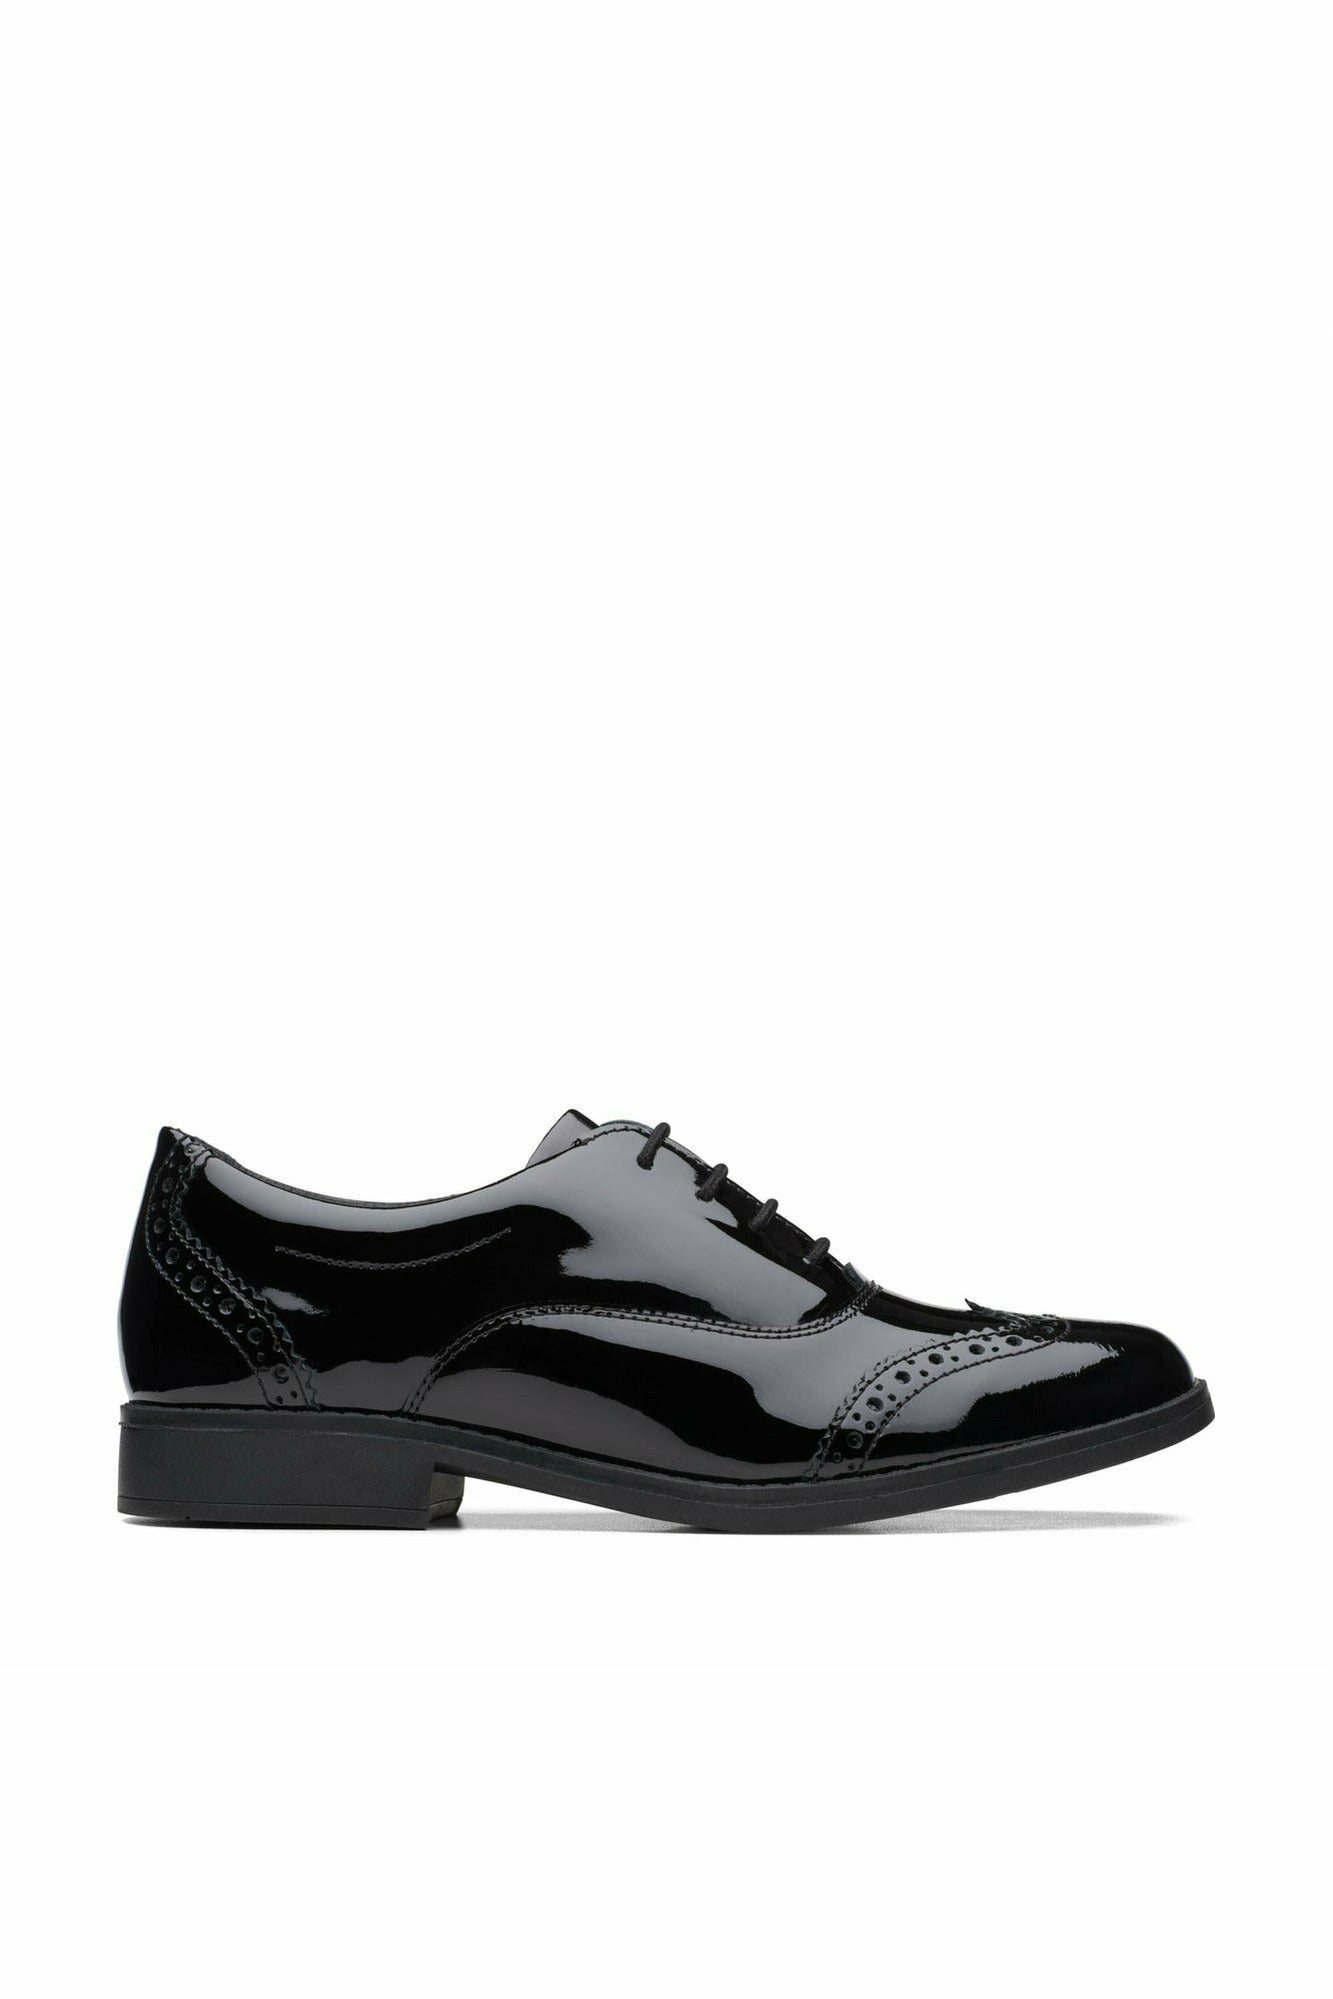 Clarks Aubrie Tap Youth black patent